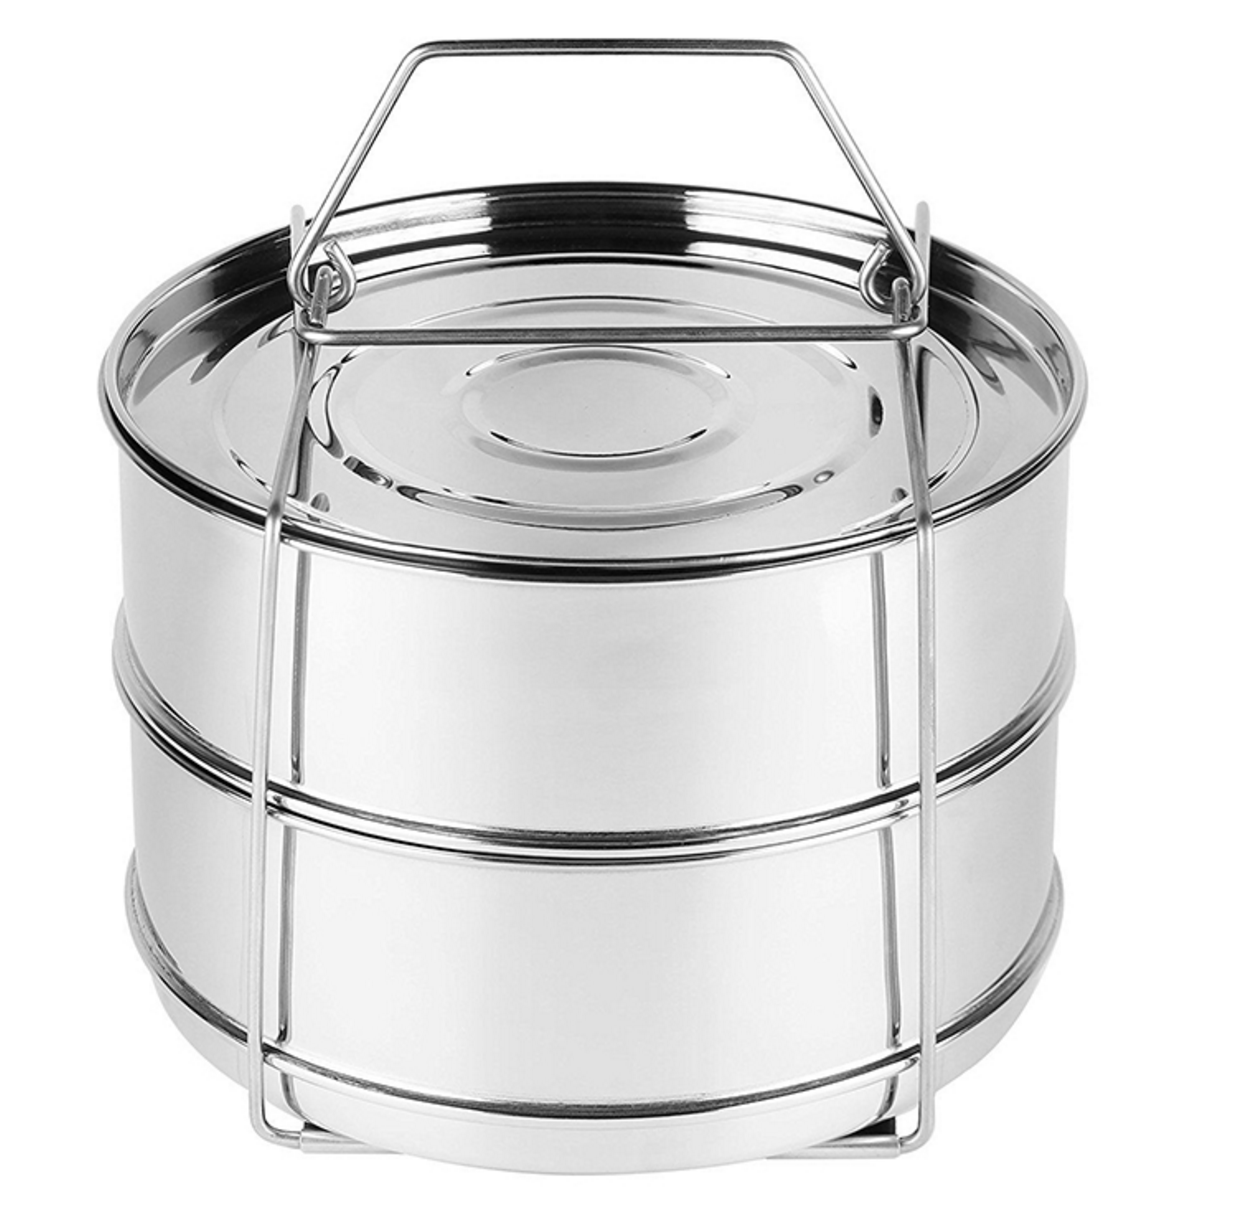 2023 Popular Stackable Stainless Steel High Pressure Cooker Steamer Basket with Lid